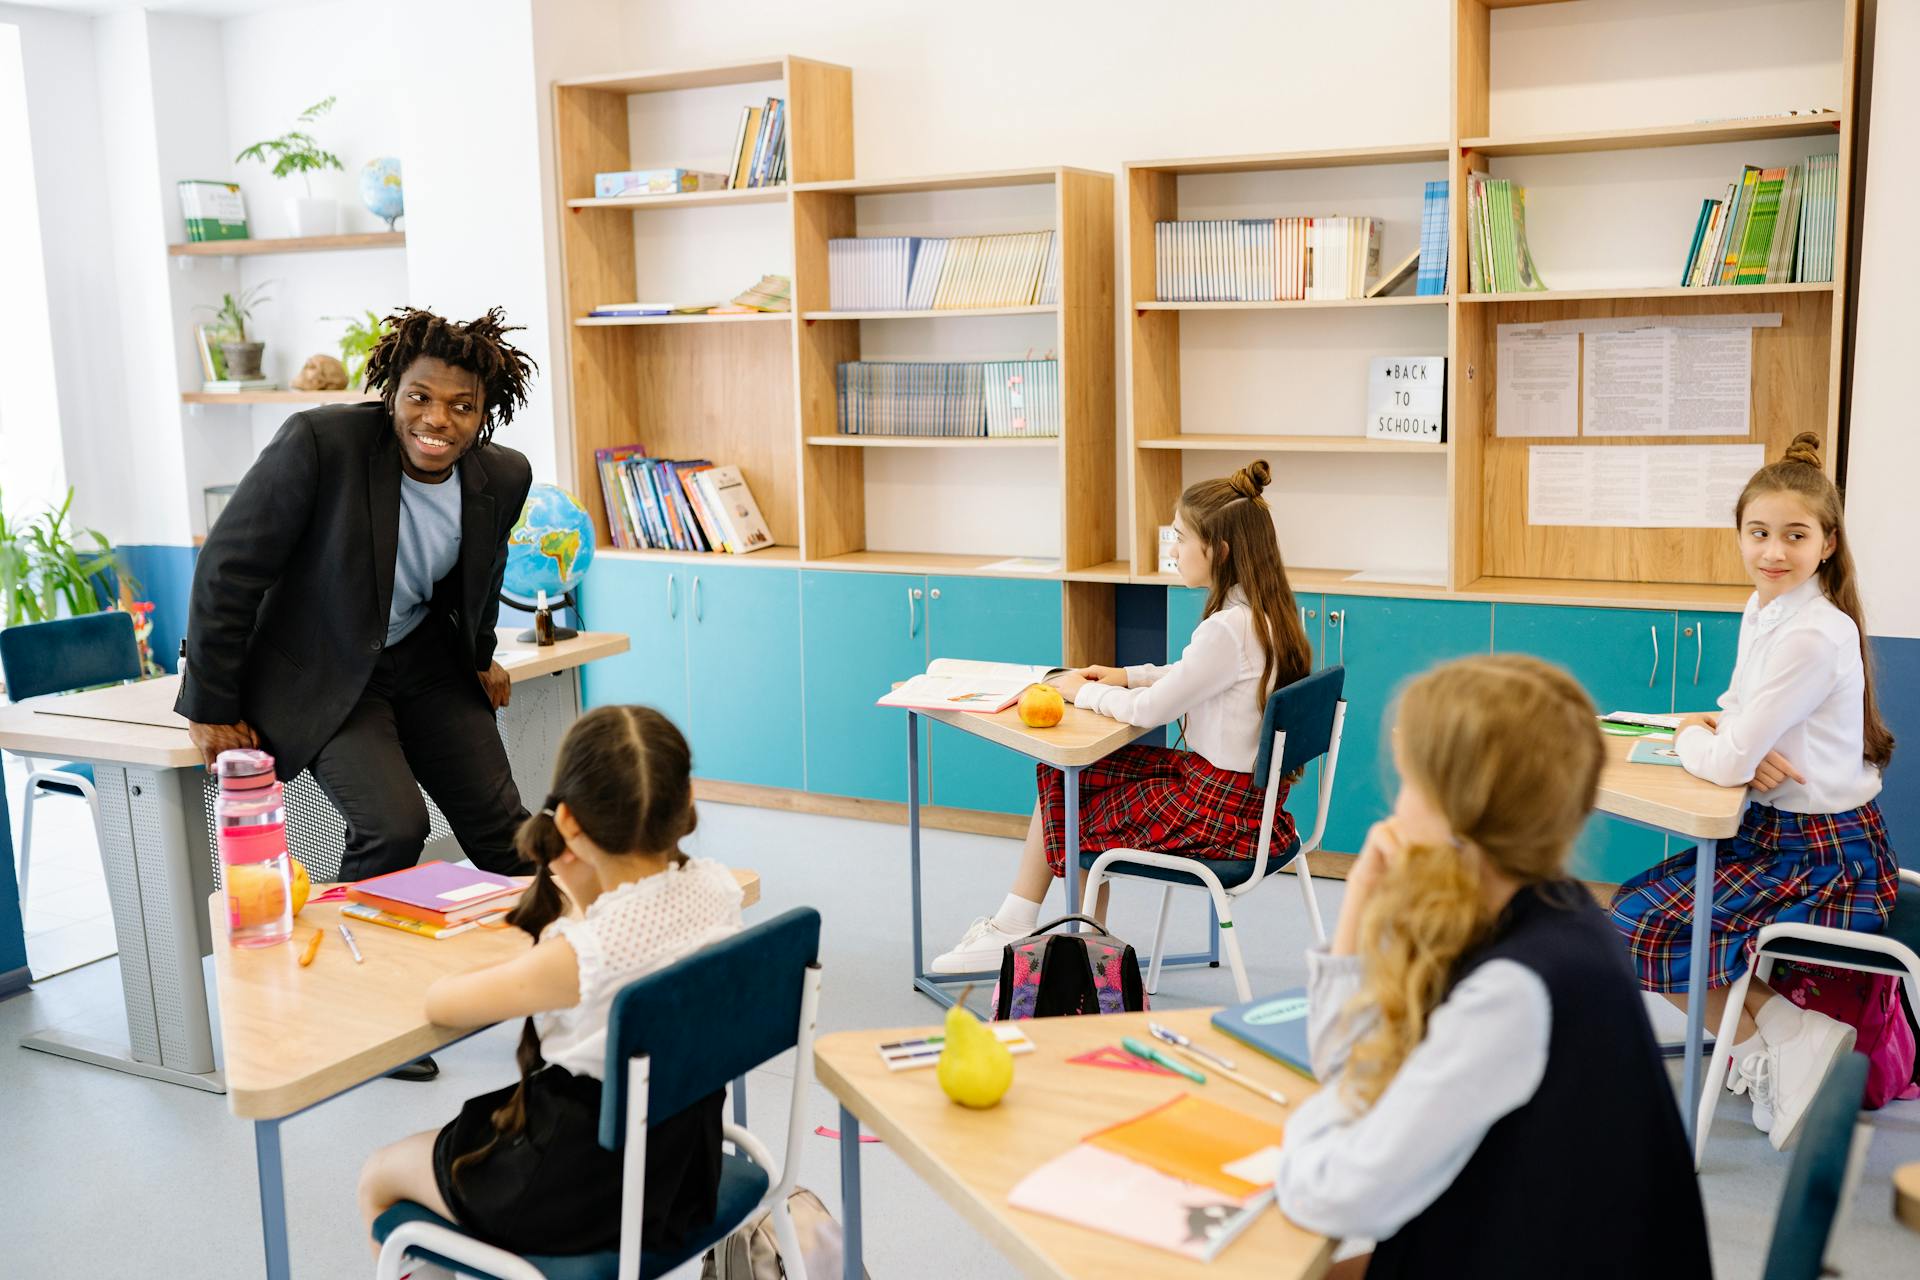 A teacher interacting with the students | Source: Pexels